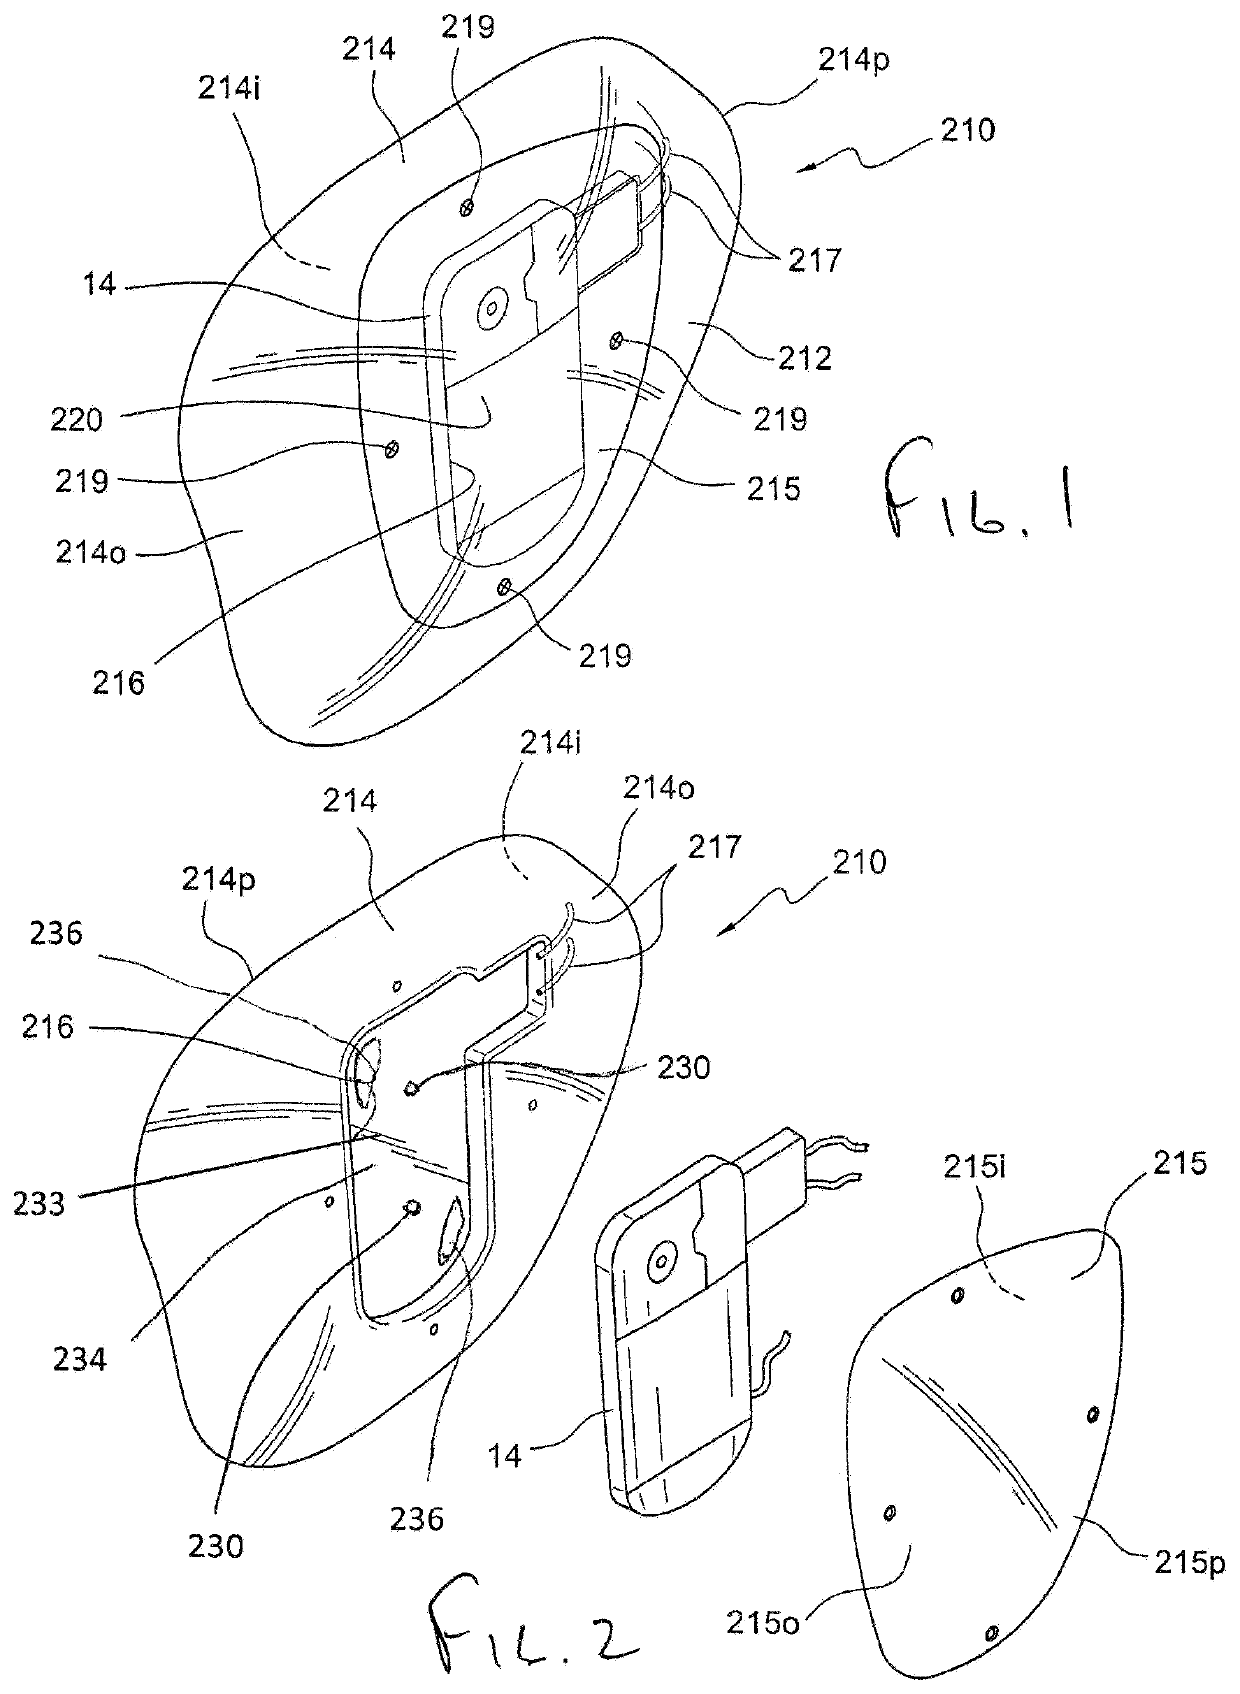 Low-profile intercranial device with enhancing grounding to ensure proper impedance measurements